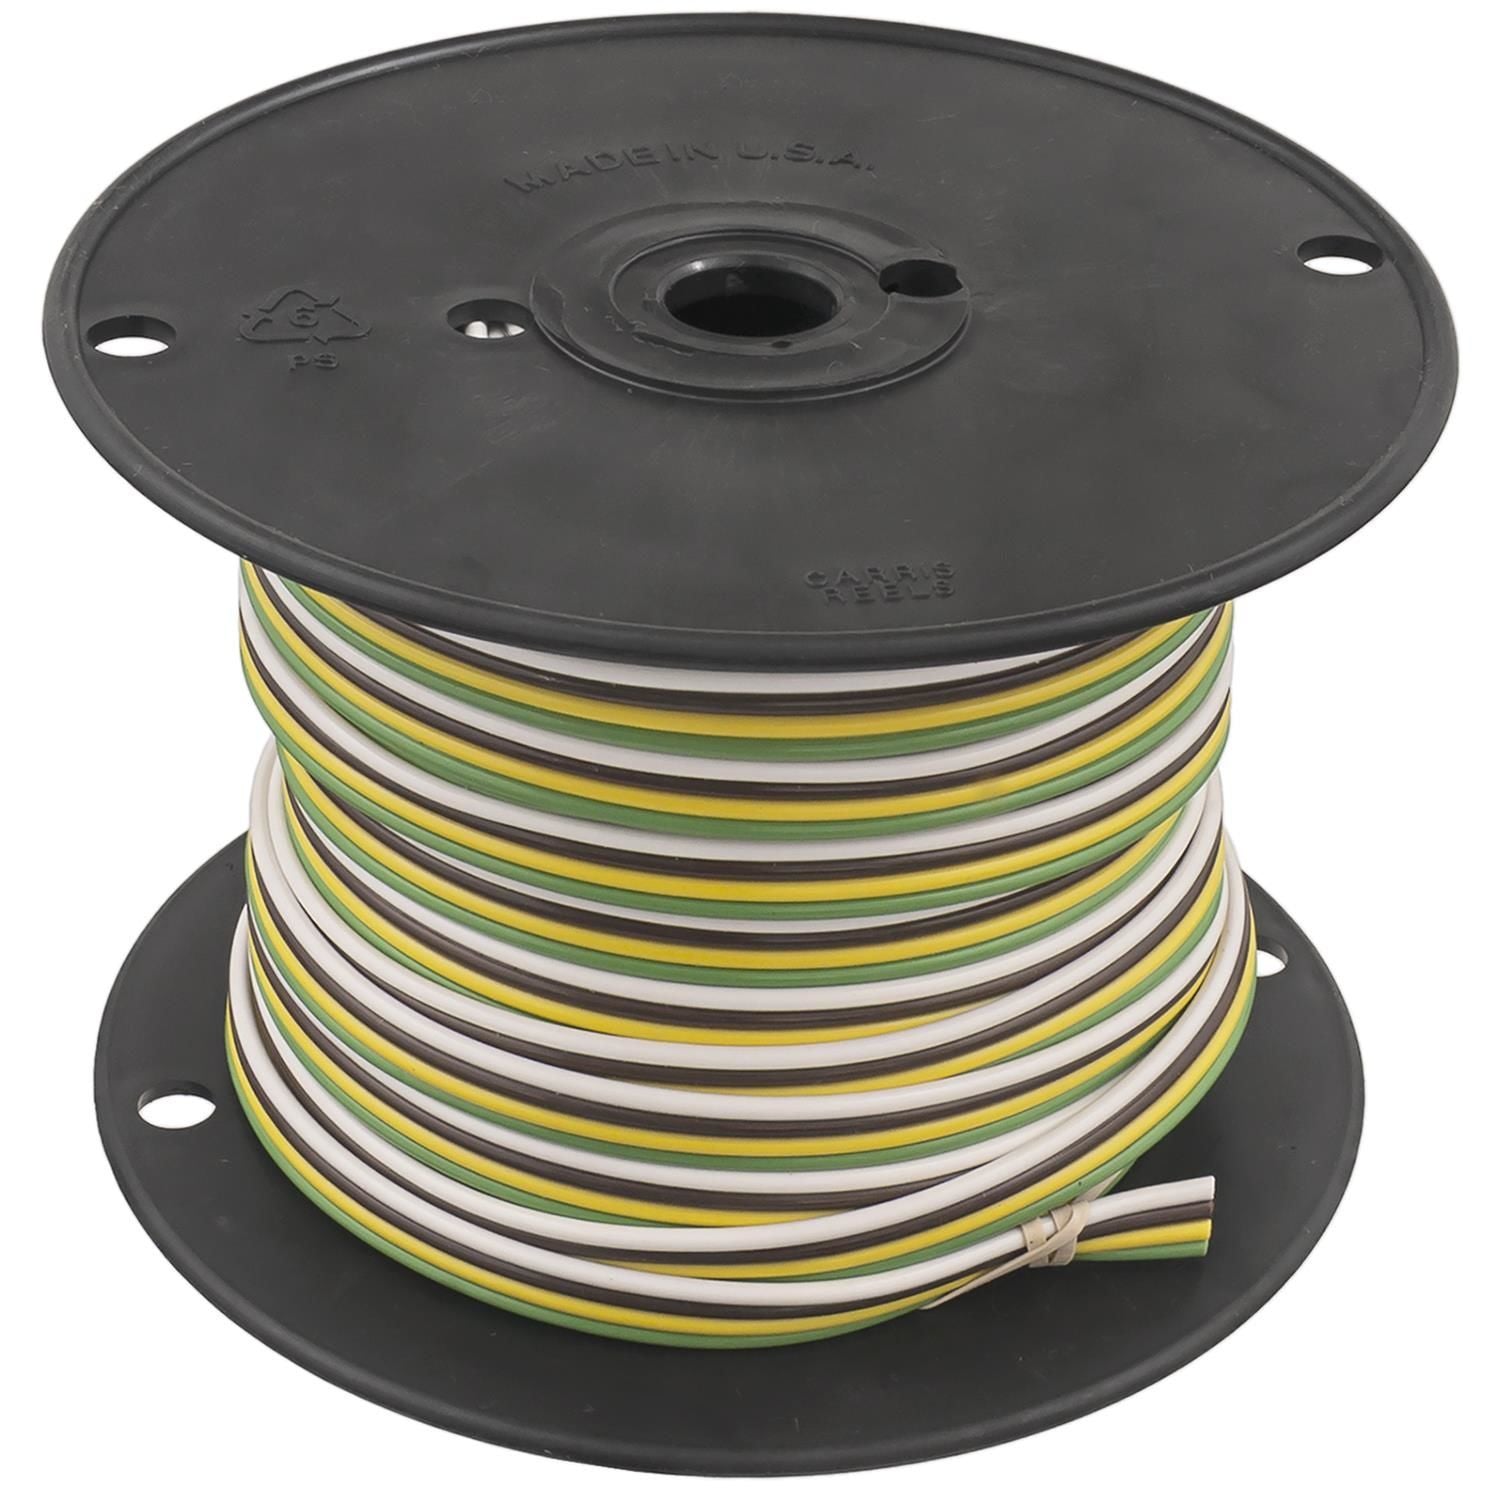 YSP WR118-100 Wells Flat Multi-Conductor Primary Wire (16G, 4 Wire)